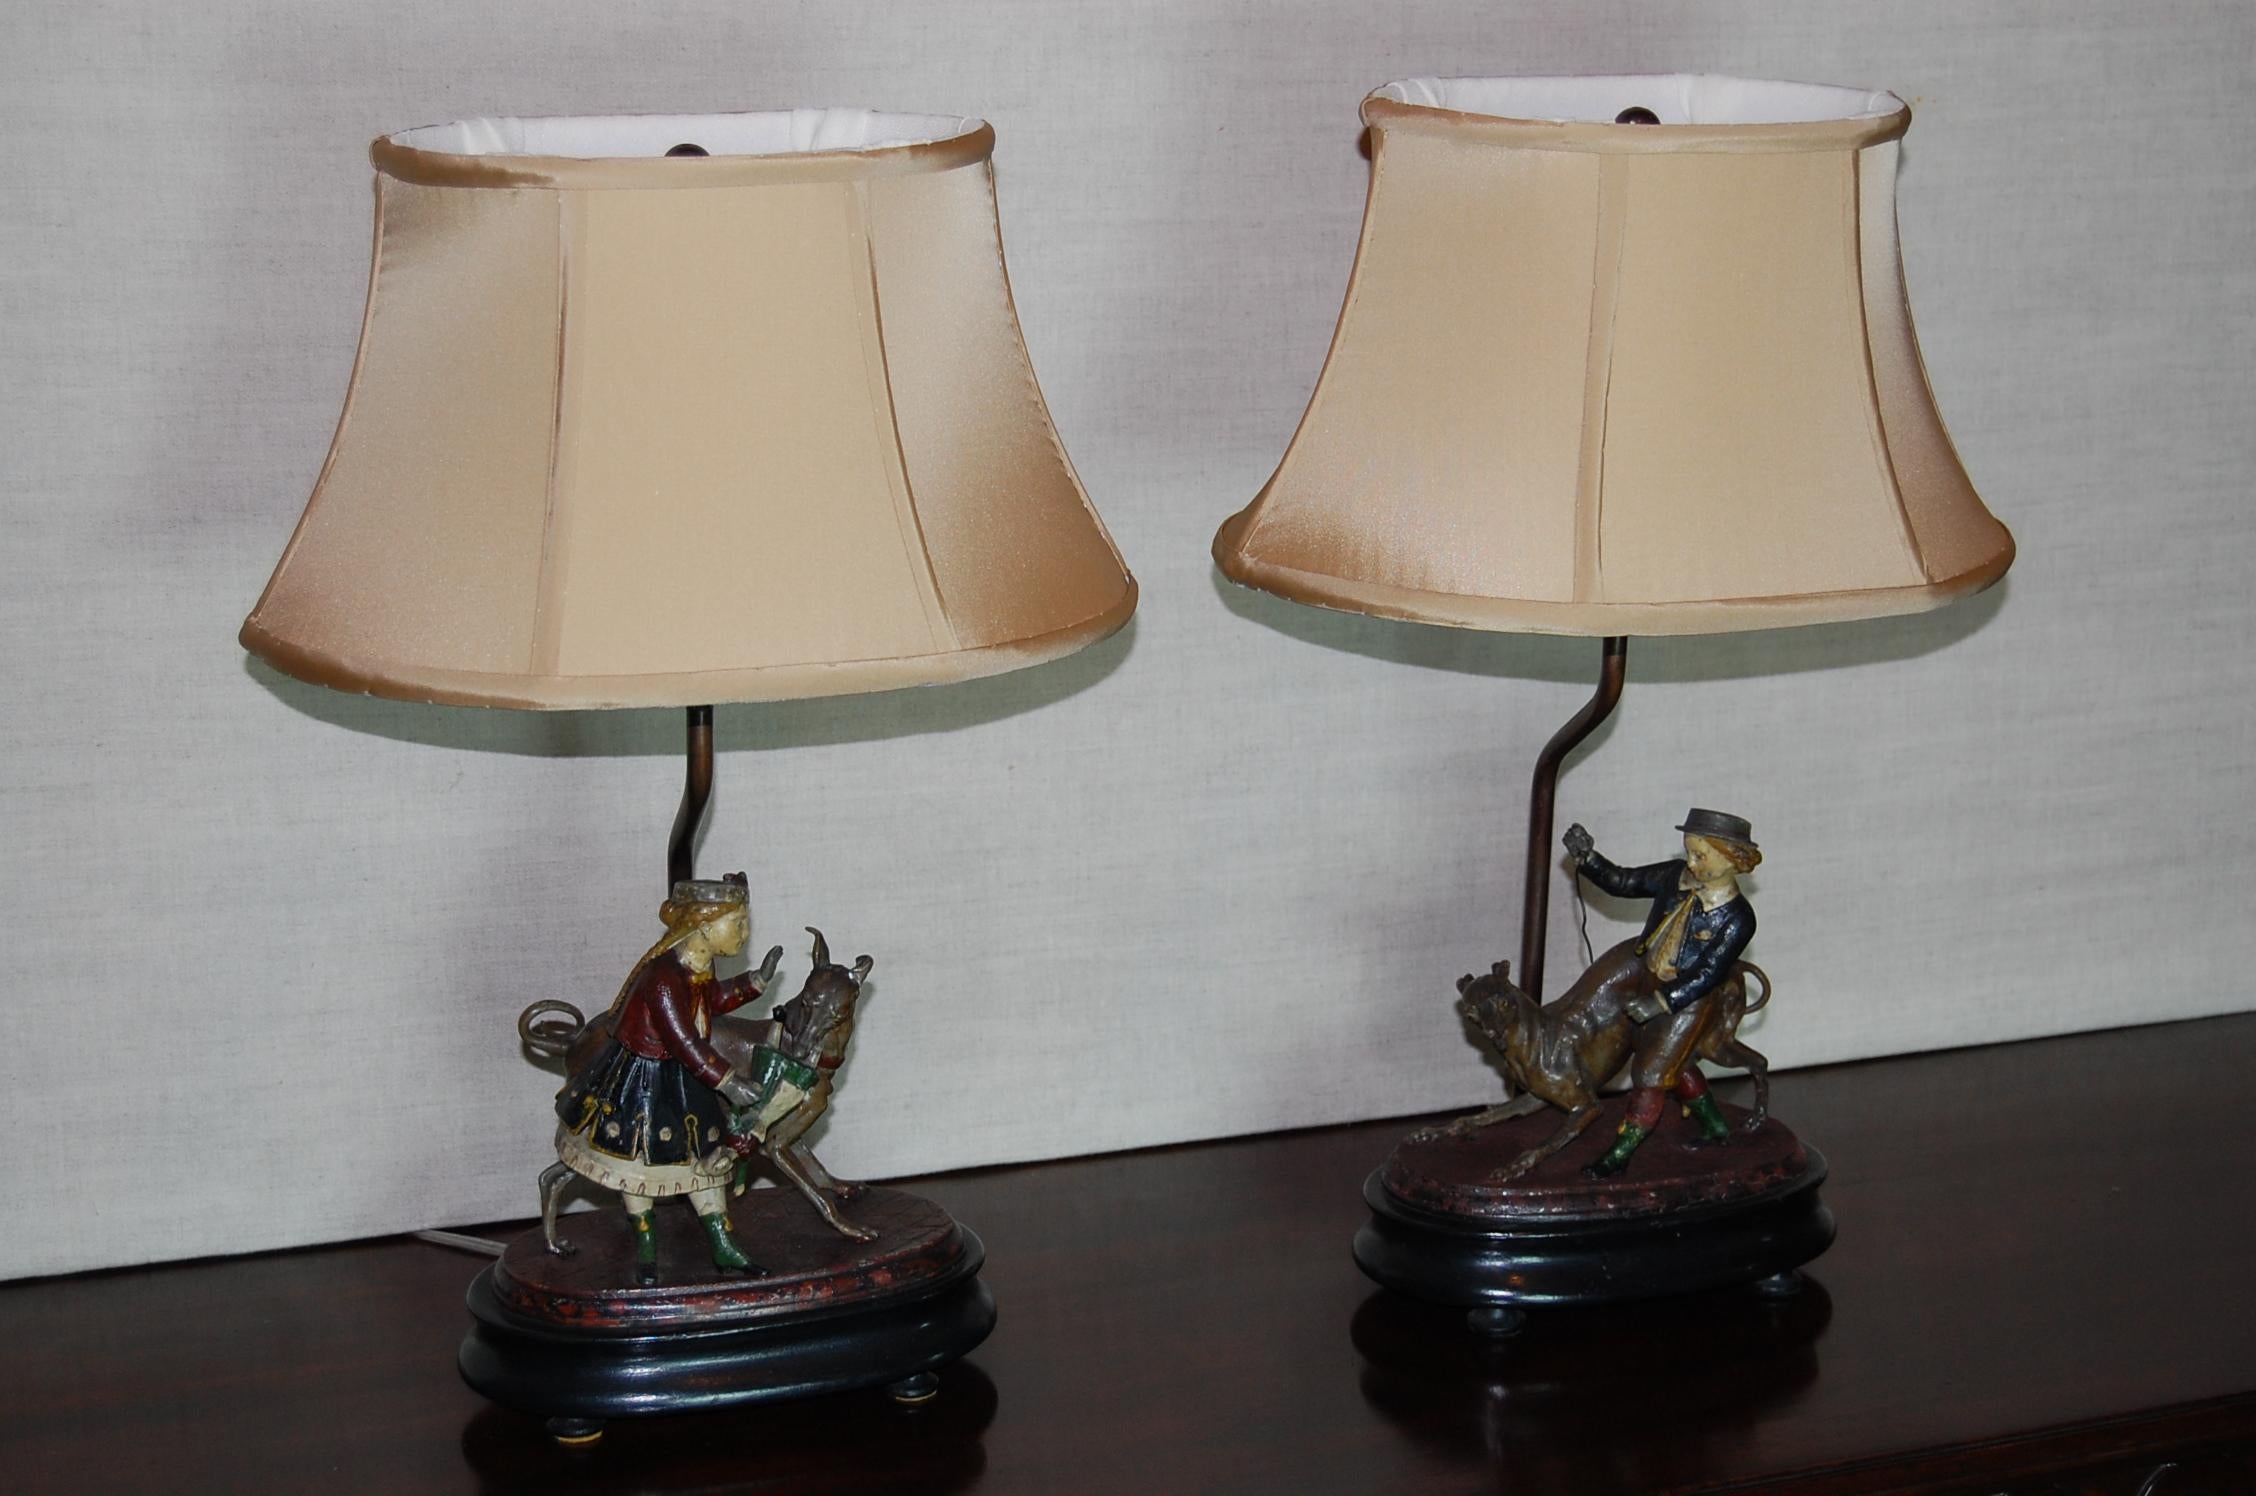 Pair of exquisite hand painted tin figures of children playing with their dogs in original finish on the original oval wooden bases, circa 1830. Pair of custom made silk shades and just rewired. Possibly German or Russian in origin.